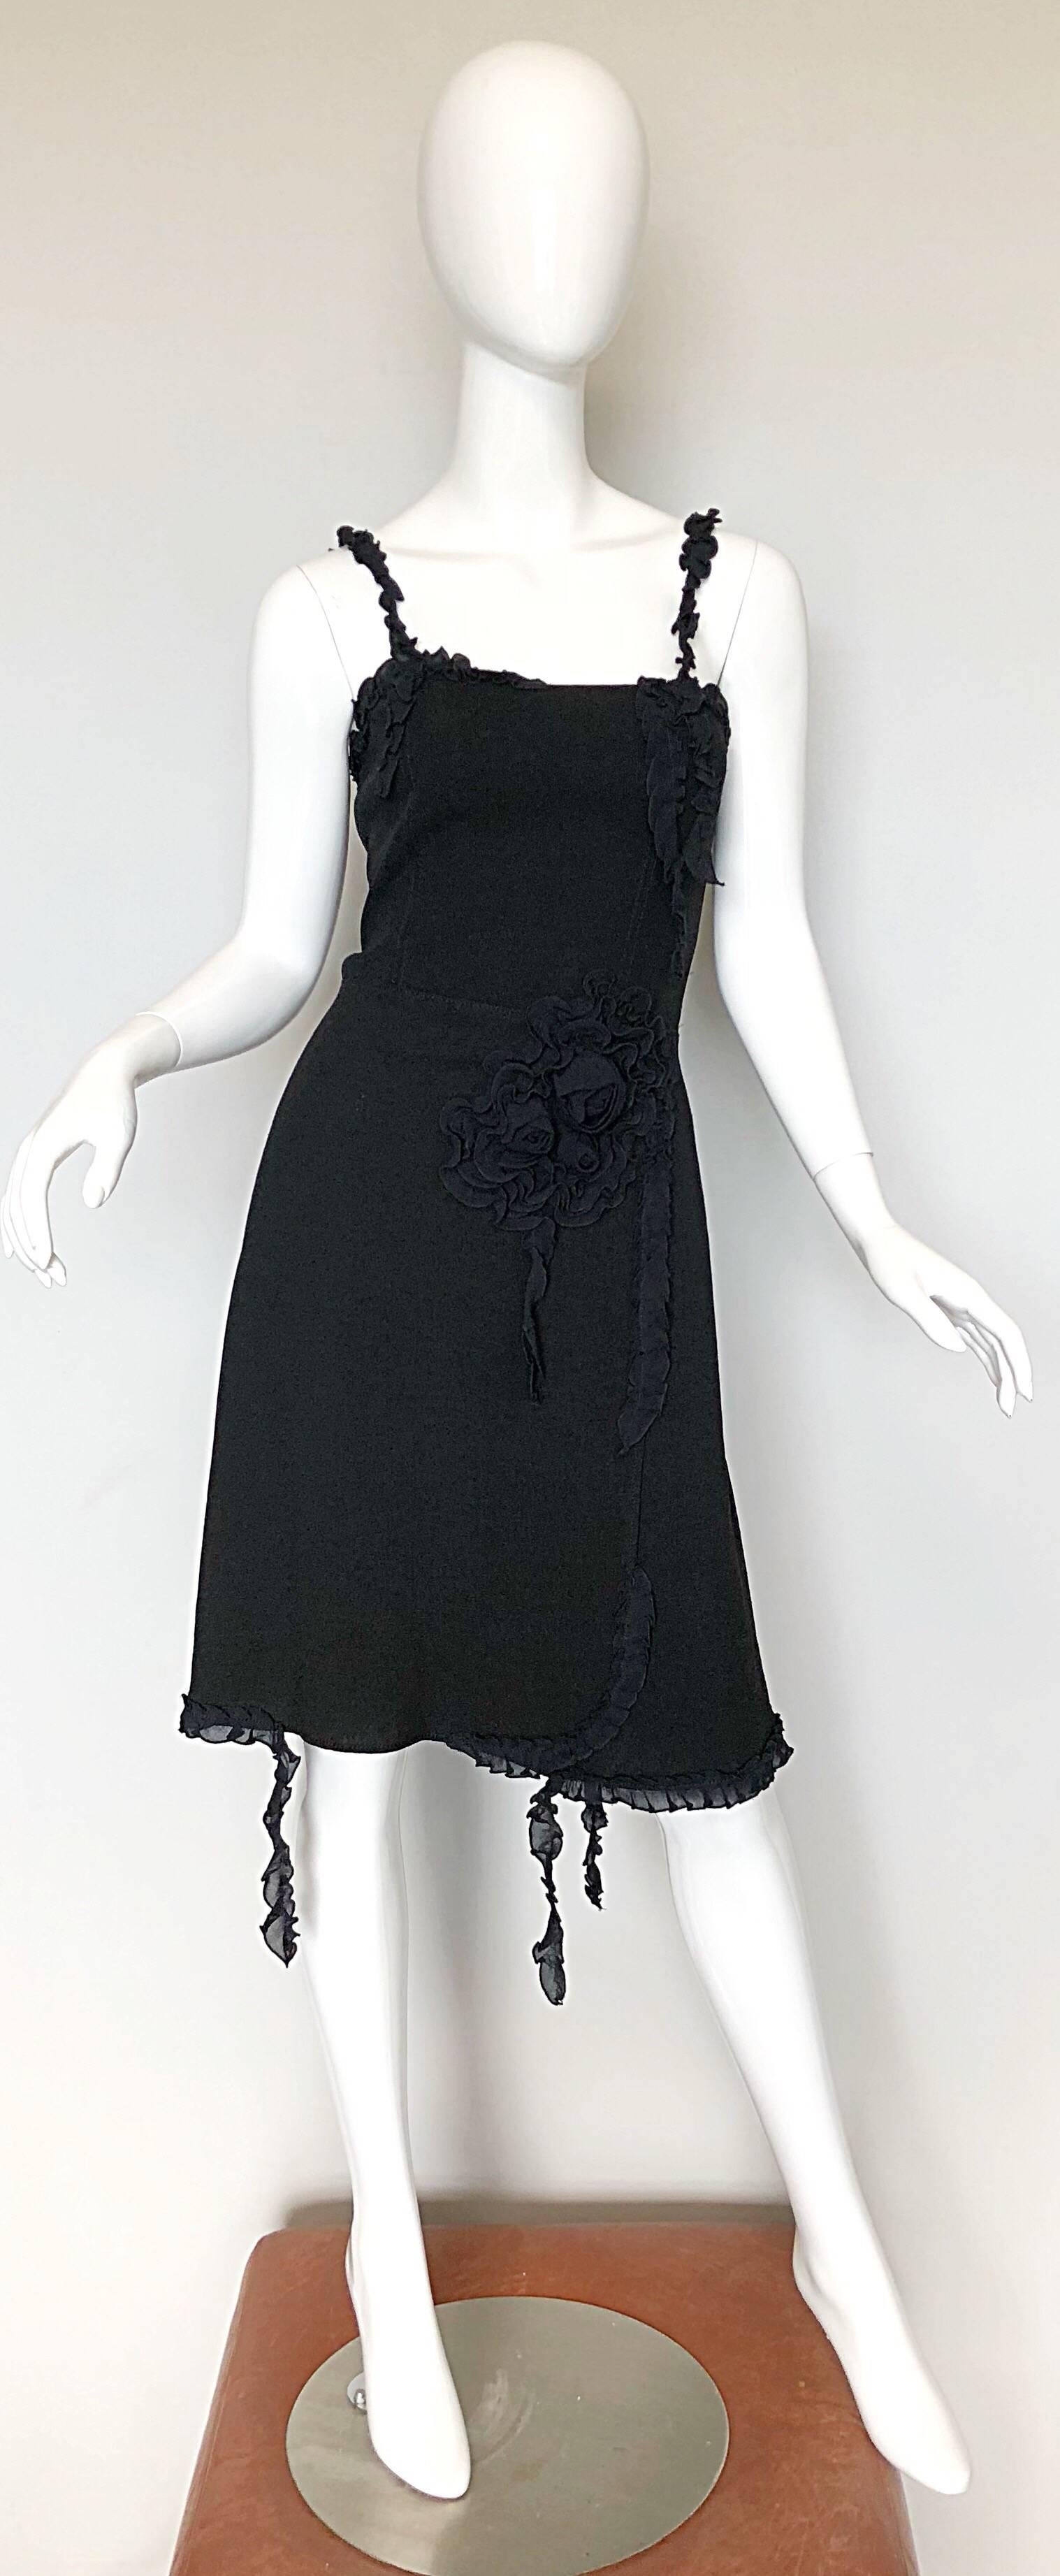 Classic, with an edge 1990s MOSCHINO CHEAP AND CHIC little black dress! Features a fitted tailored bodice with black rosettes and appliqués on left waist. Flirty skirt can accomodate an array of sizes. Fringe-like detail below each strap, and